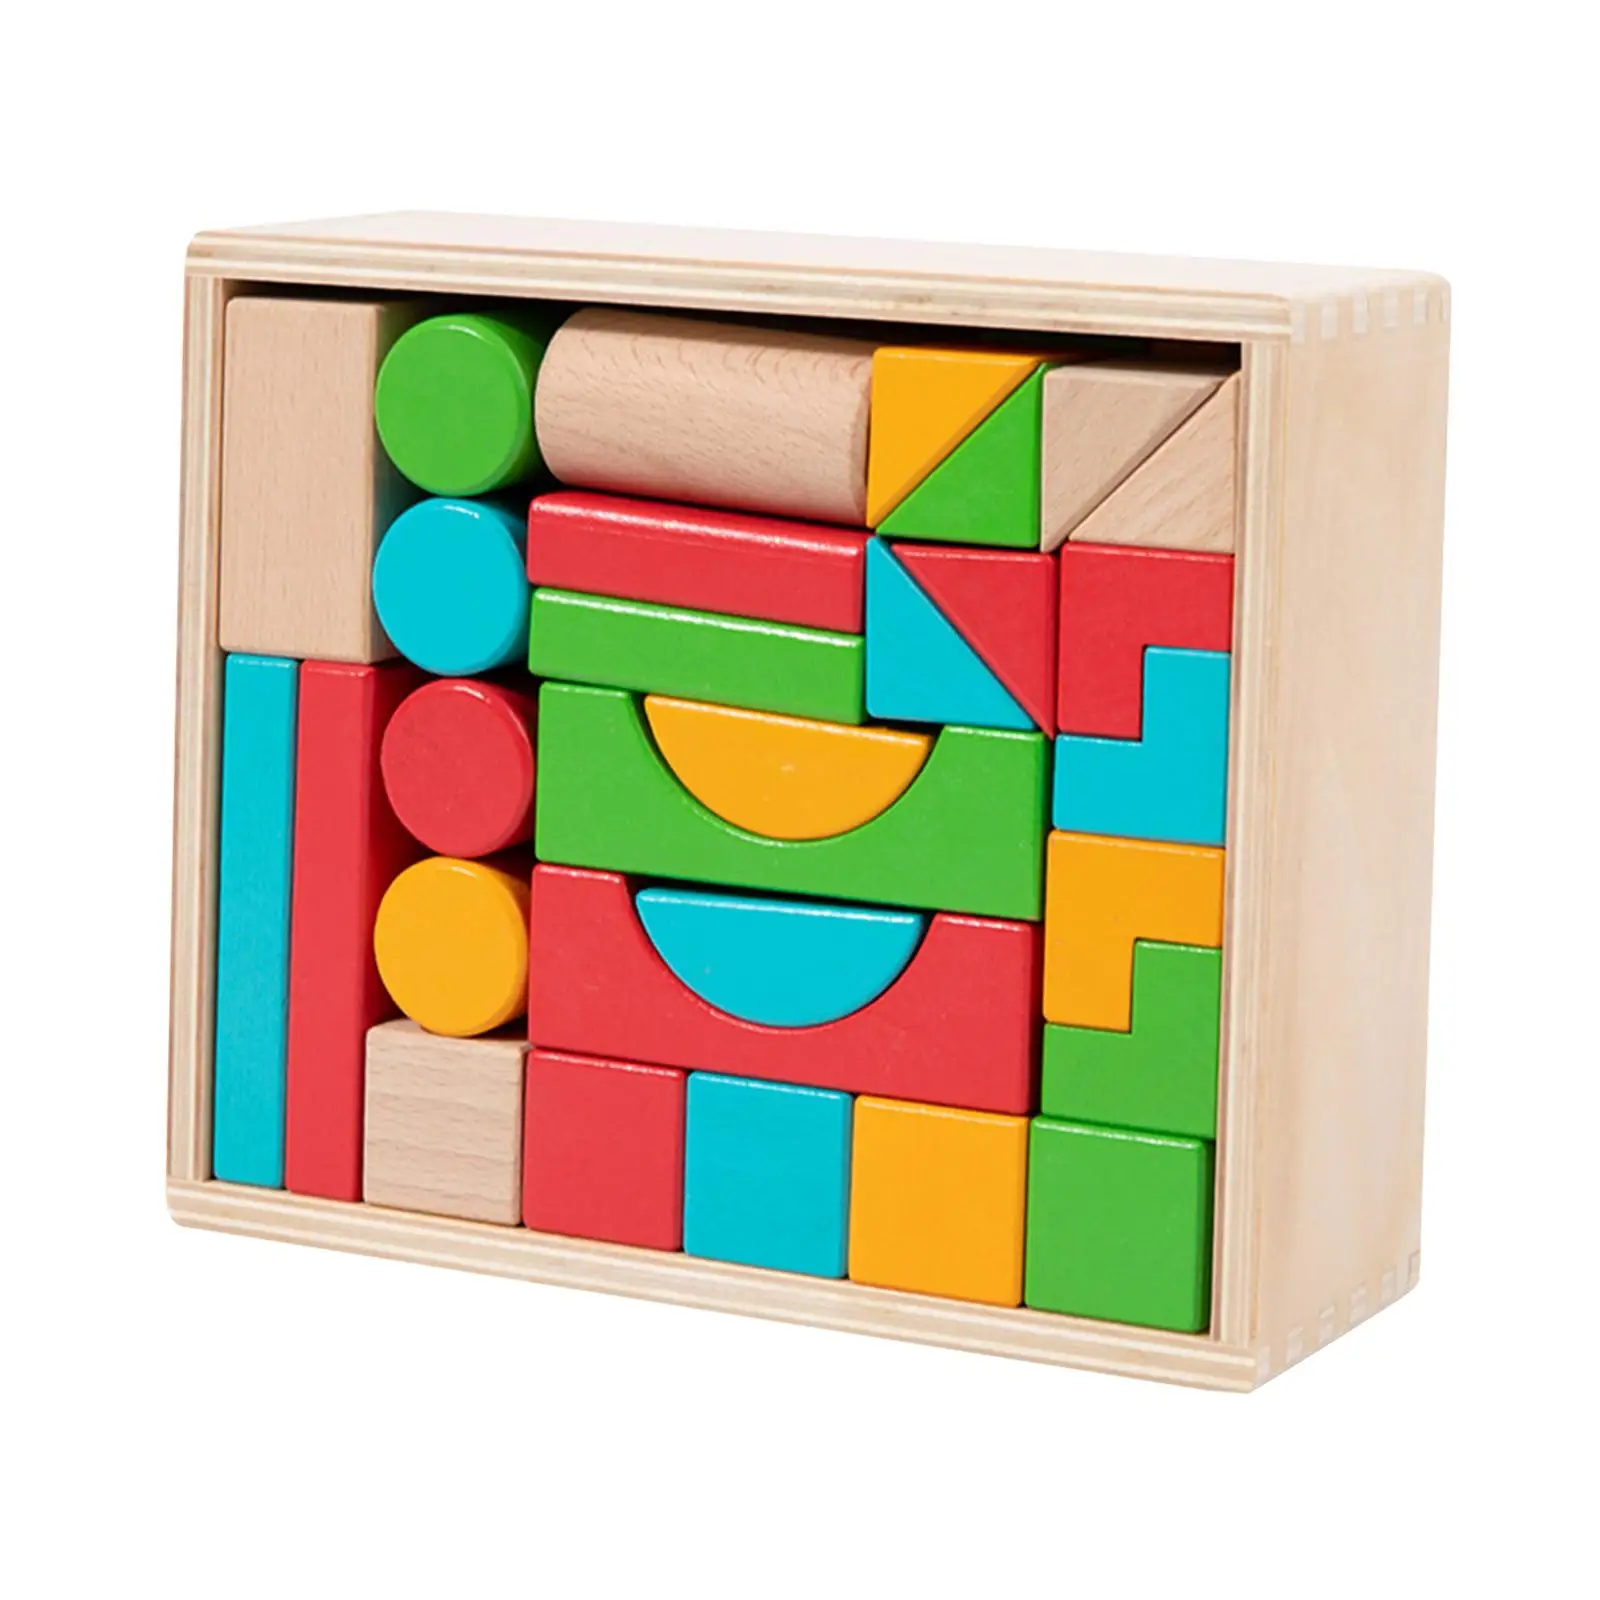 Assembly Montessori Toys 3D Shapes Geometric Solids Geometric Shapes for Elementary School Classroom Manipulatives